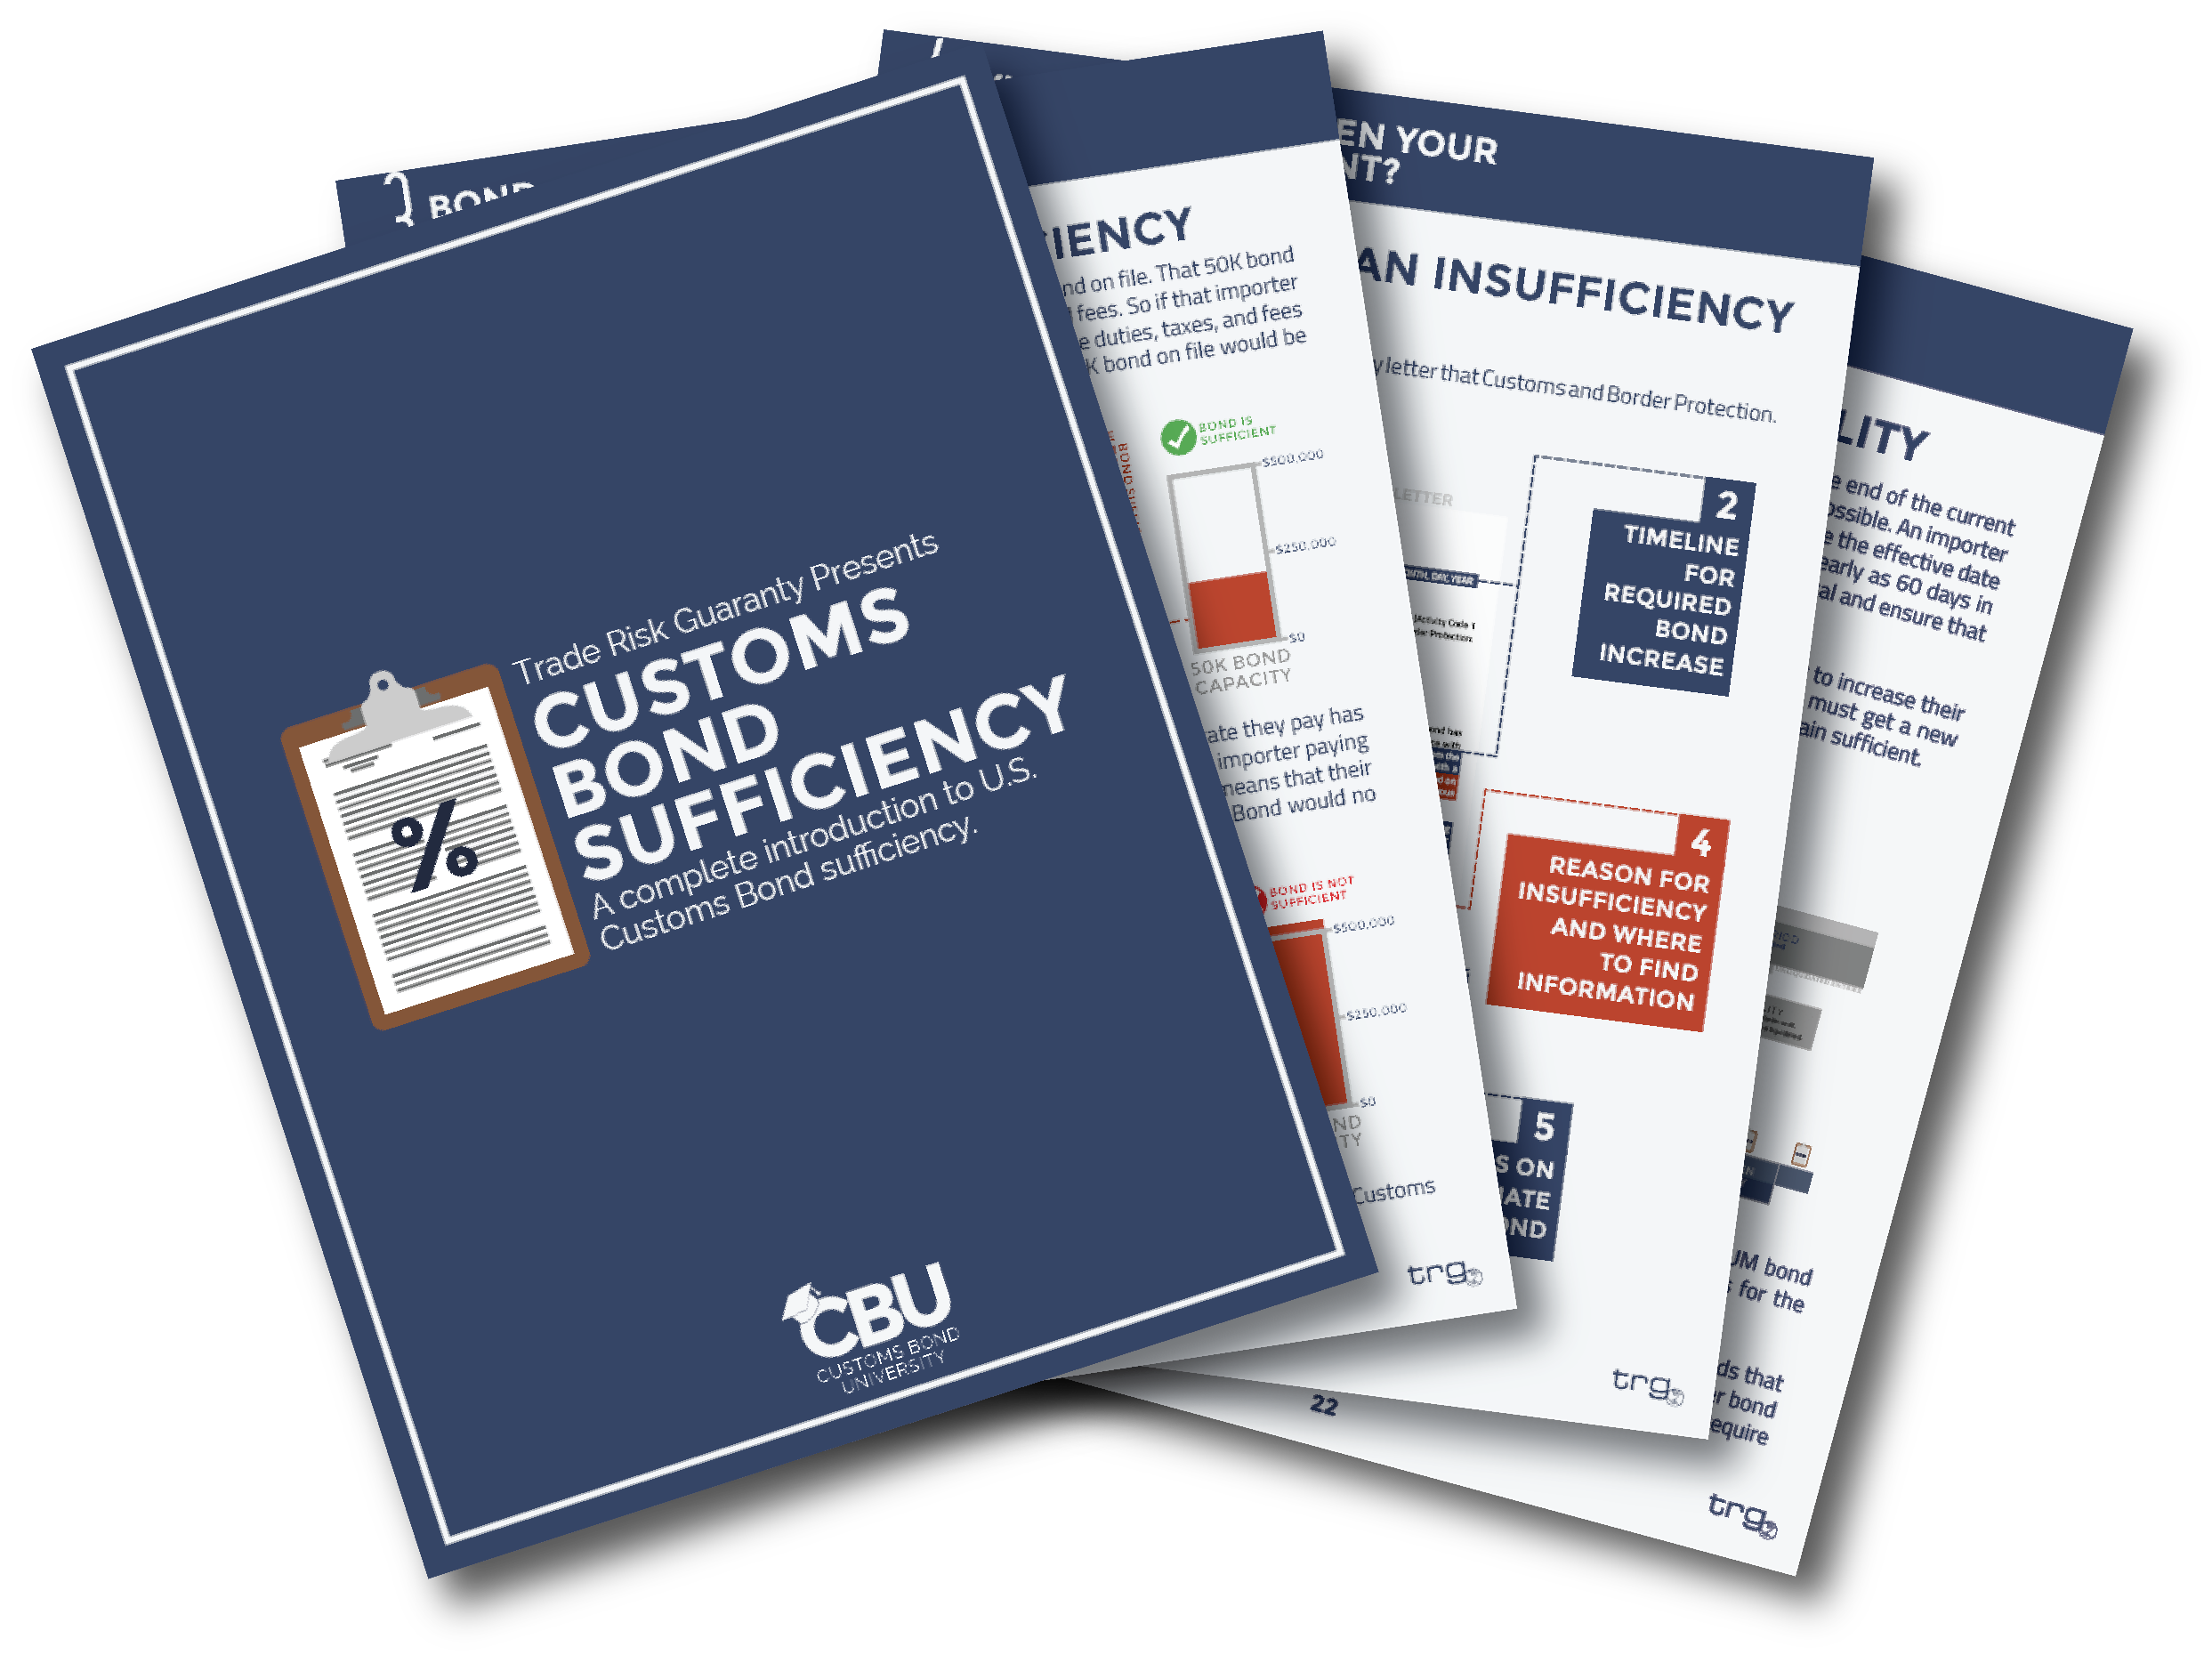 Trade Risk Guaranty provides an introduction to Customs Bond Sufficiency for U.S. Importers.